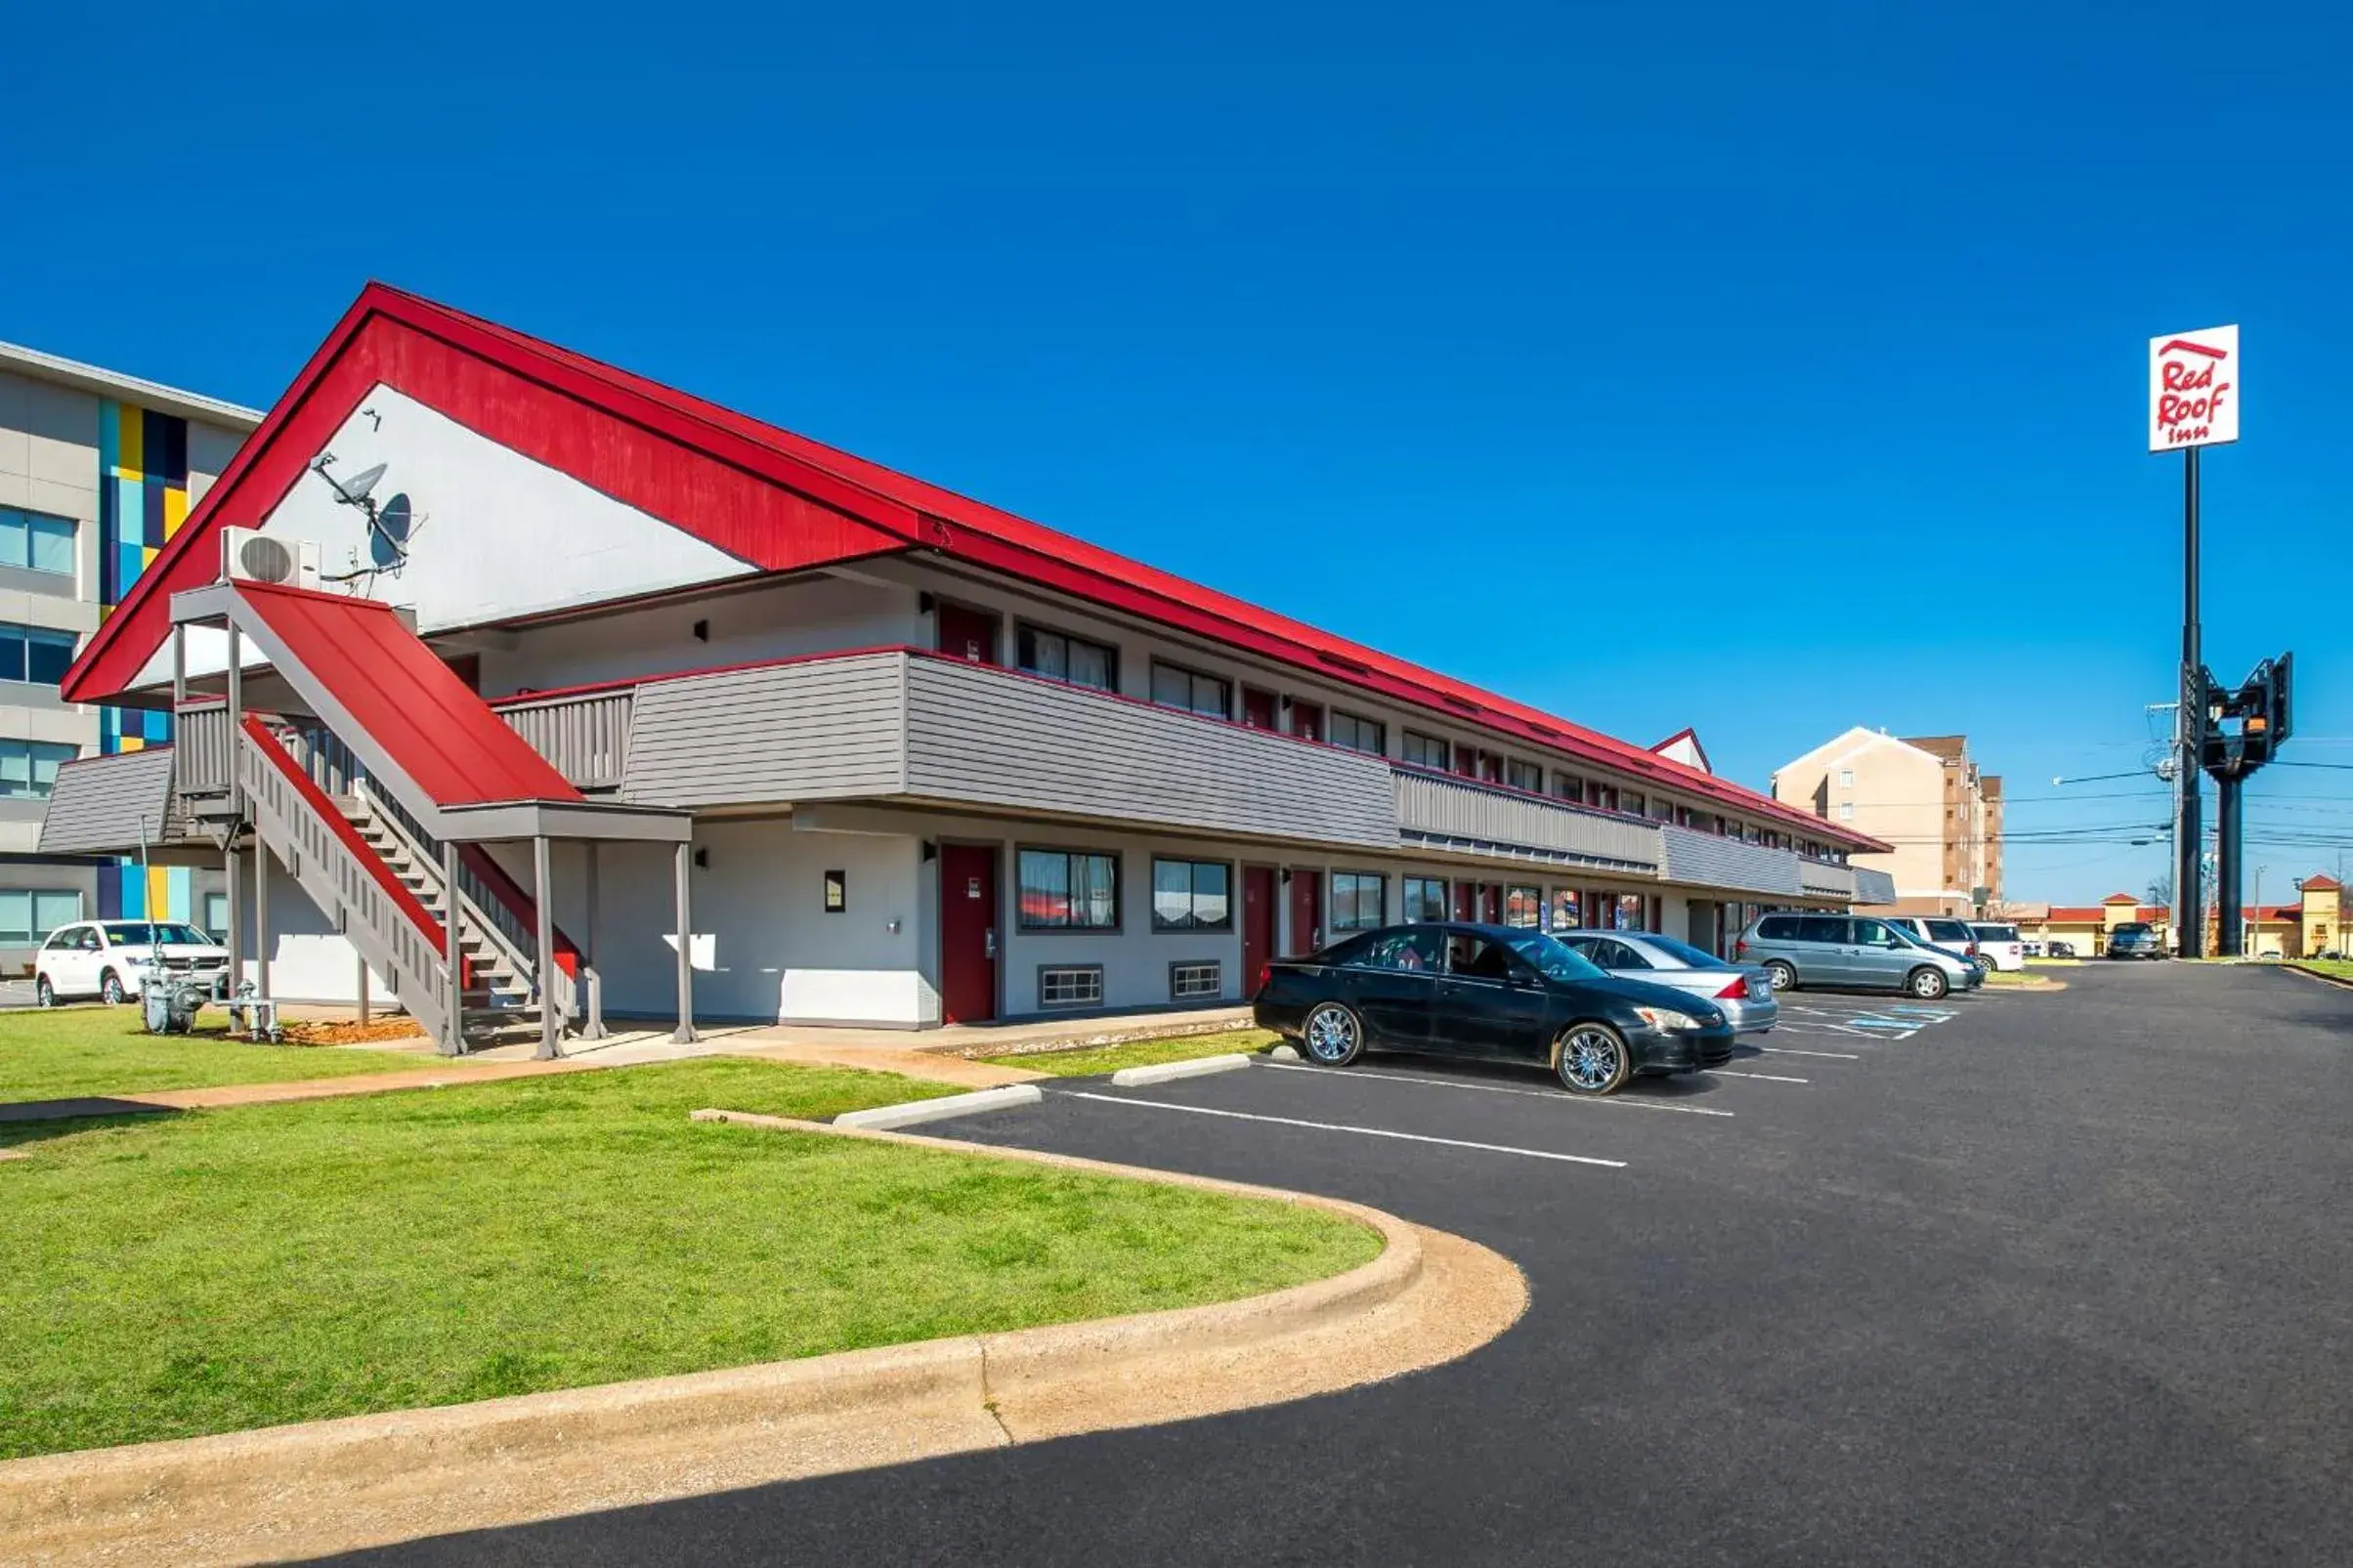 Property Building in Red Roof Inn Chattanooga Airport